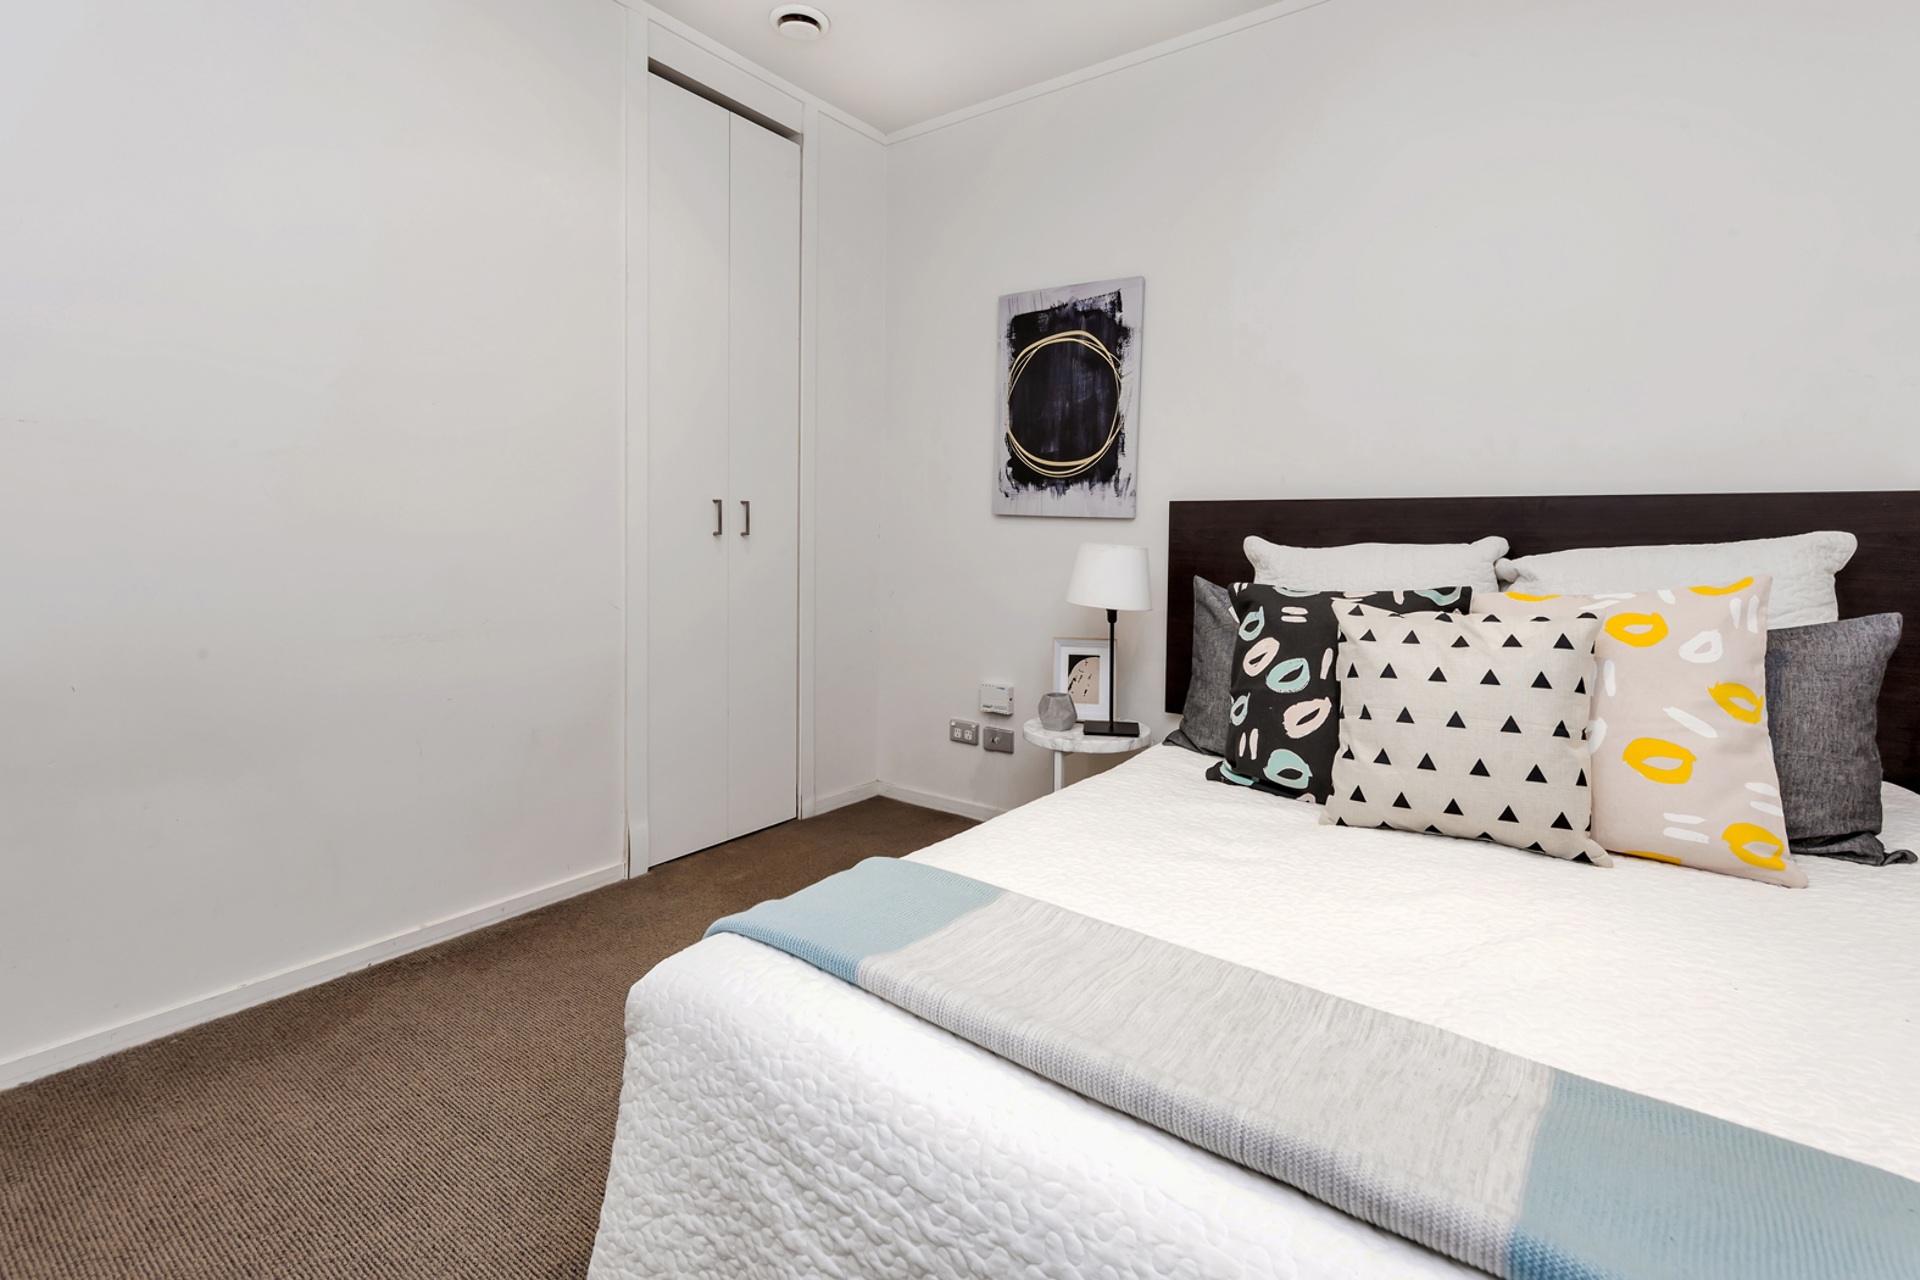 1 | 430 Queen Street, City Centre | Apartment Specialists